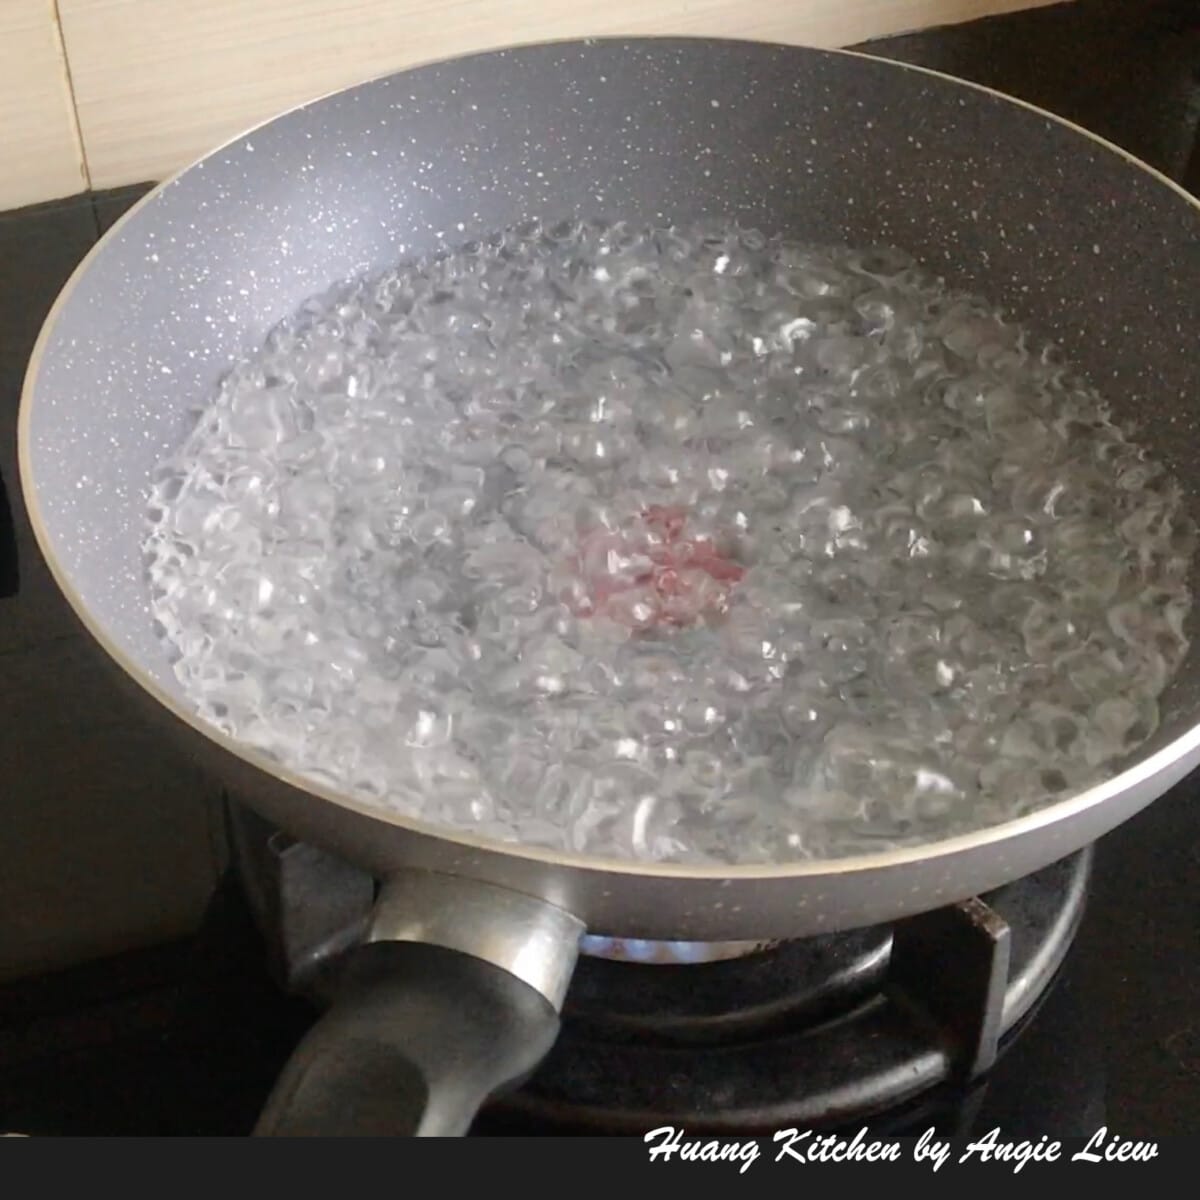 Boil water to scald egg noodles.